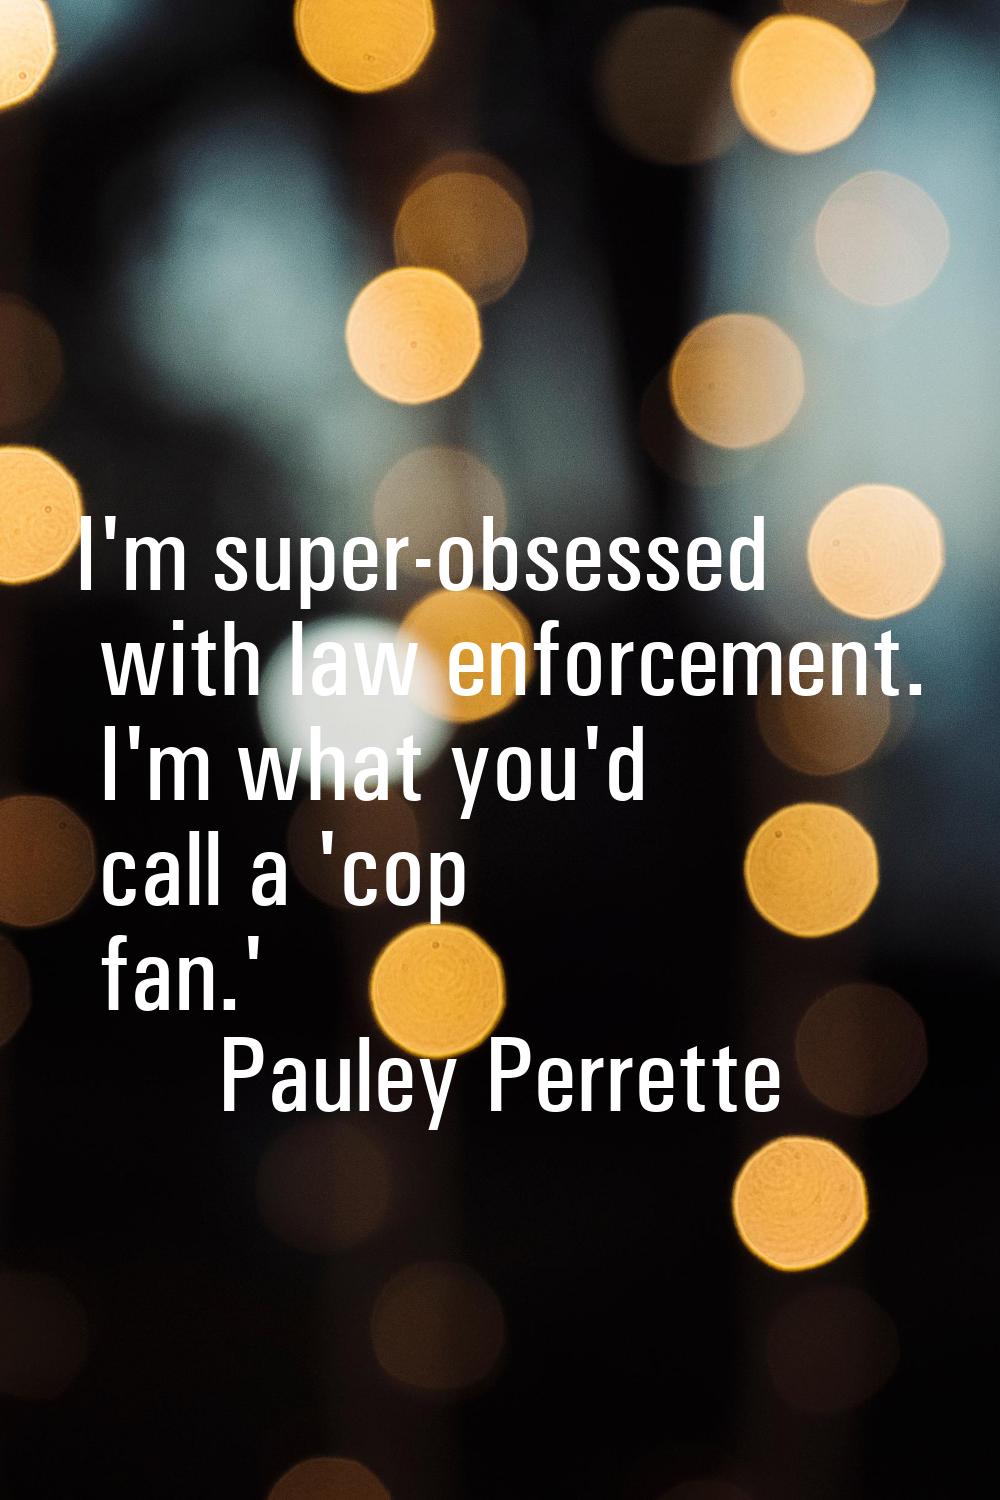 I'm super-obsessed with law enforcement. I'm what you'd call a 'cop fan.'